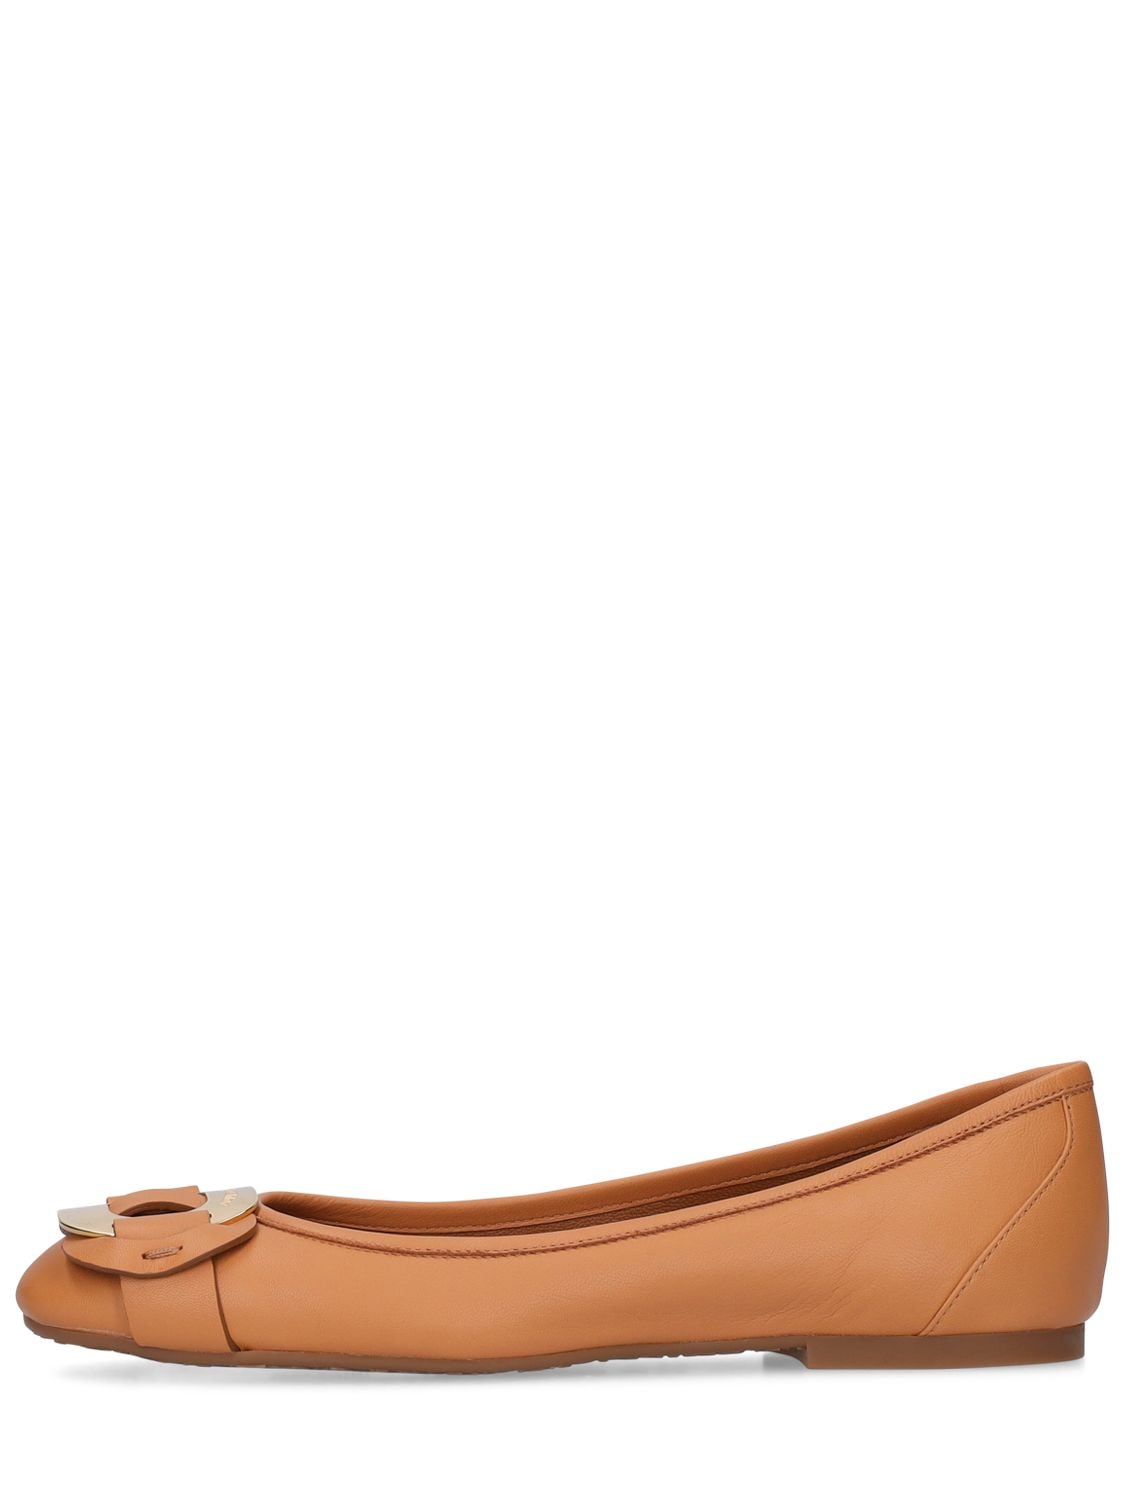 Image of 10mm Chany Leather Ballerina Flats